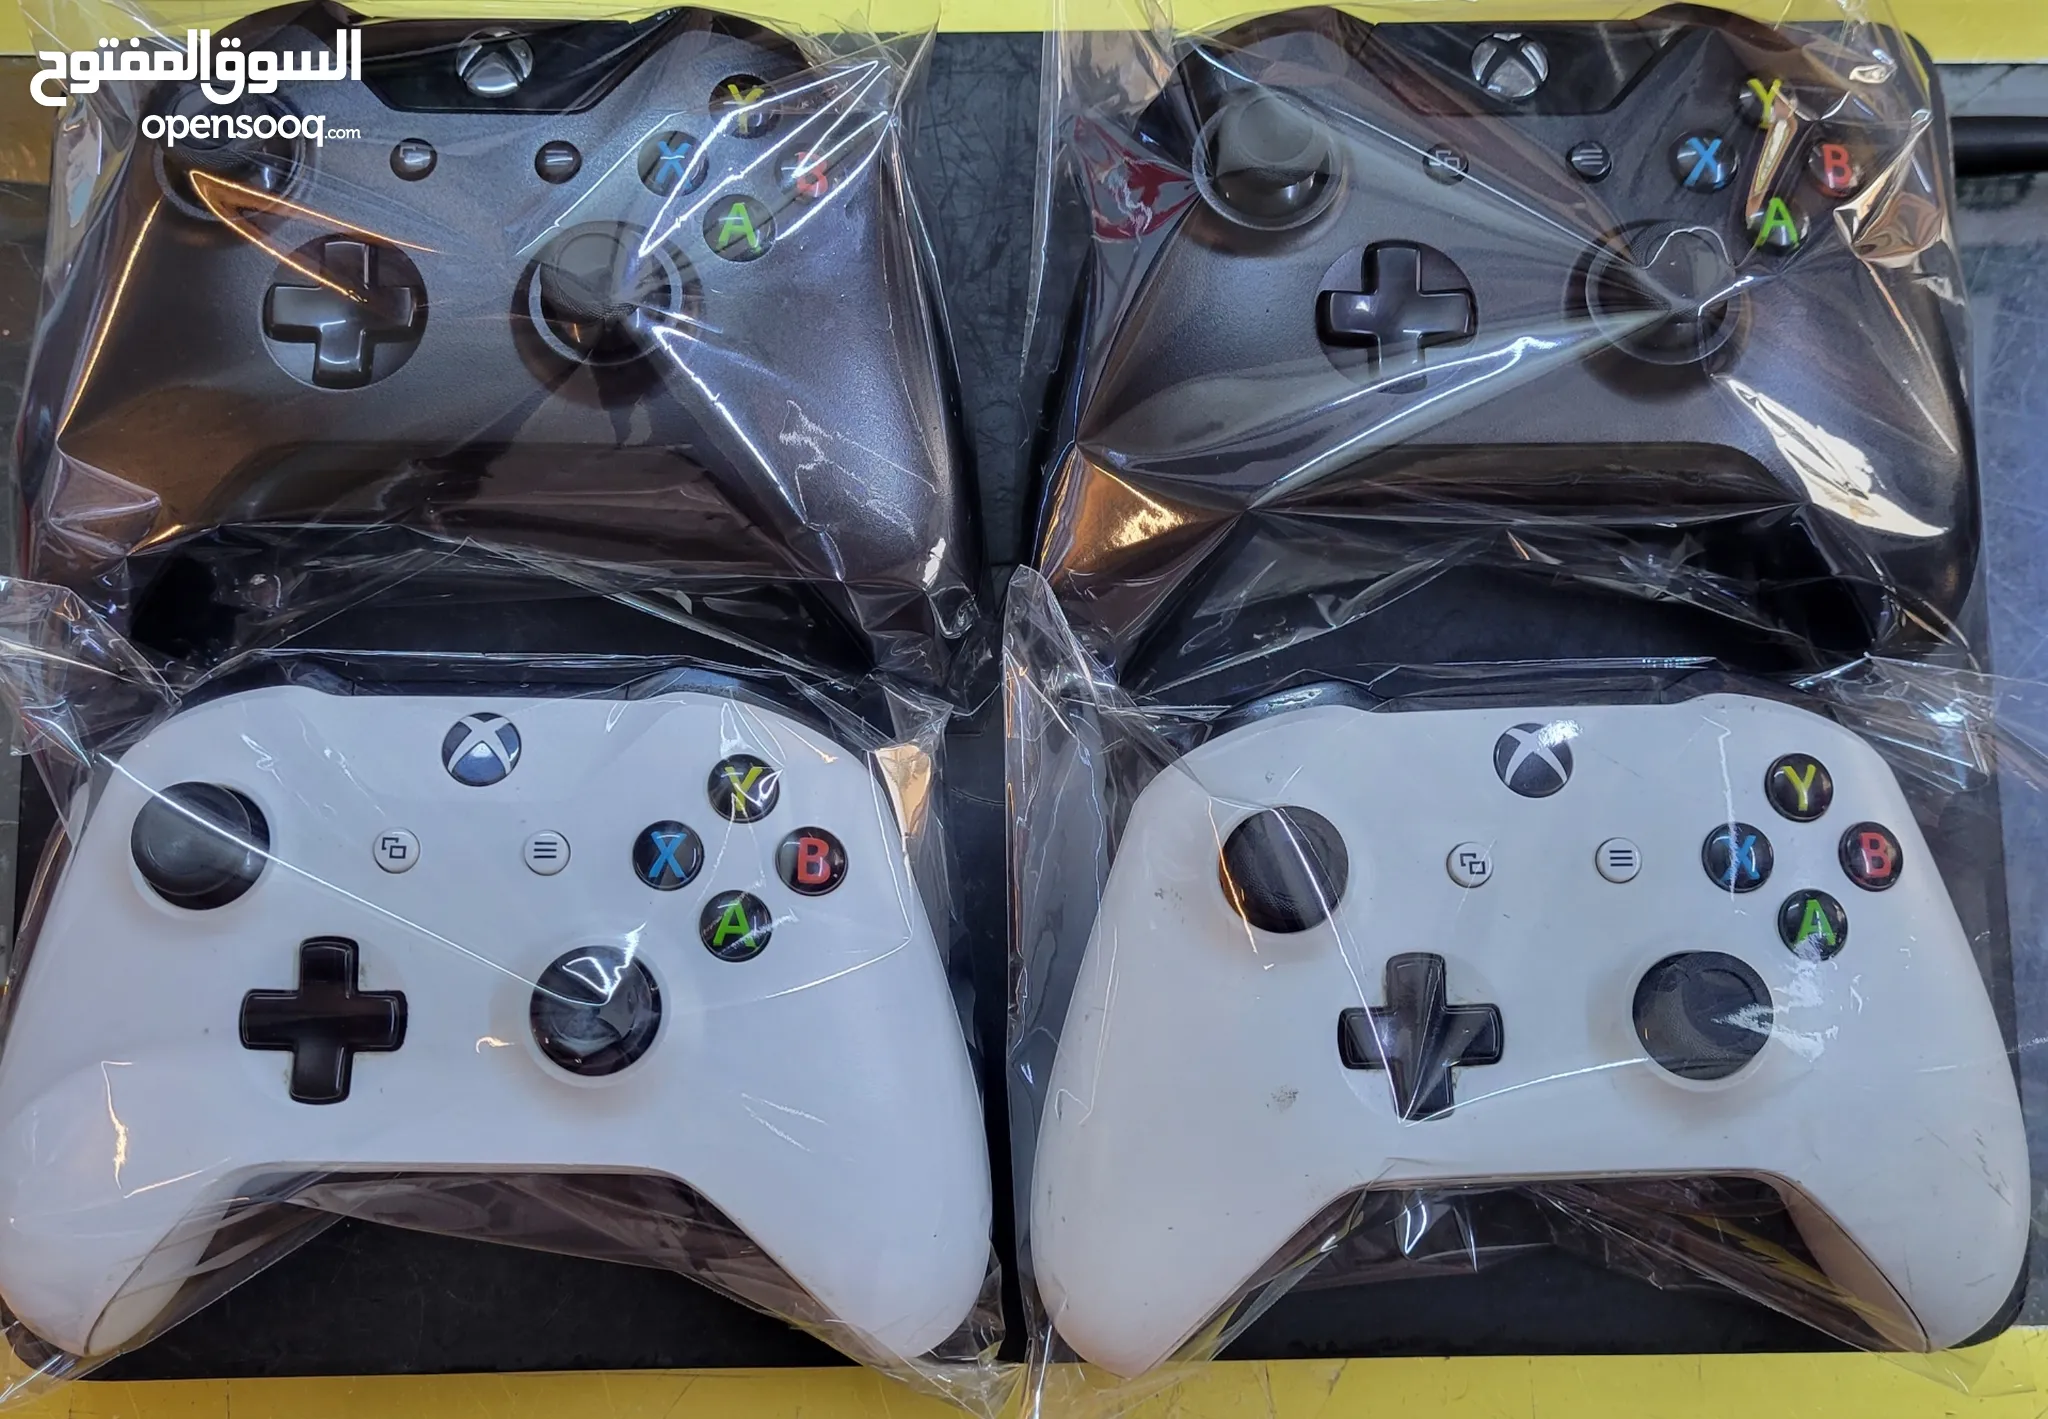 Xbox for Sale in Iraq : Best Prices | OpenSooq